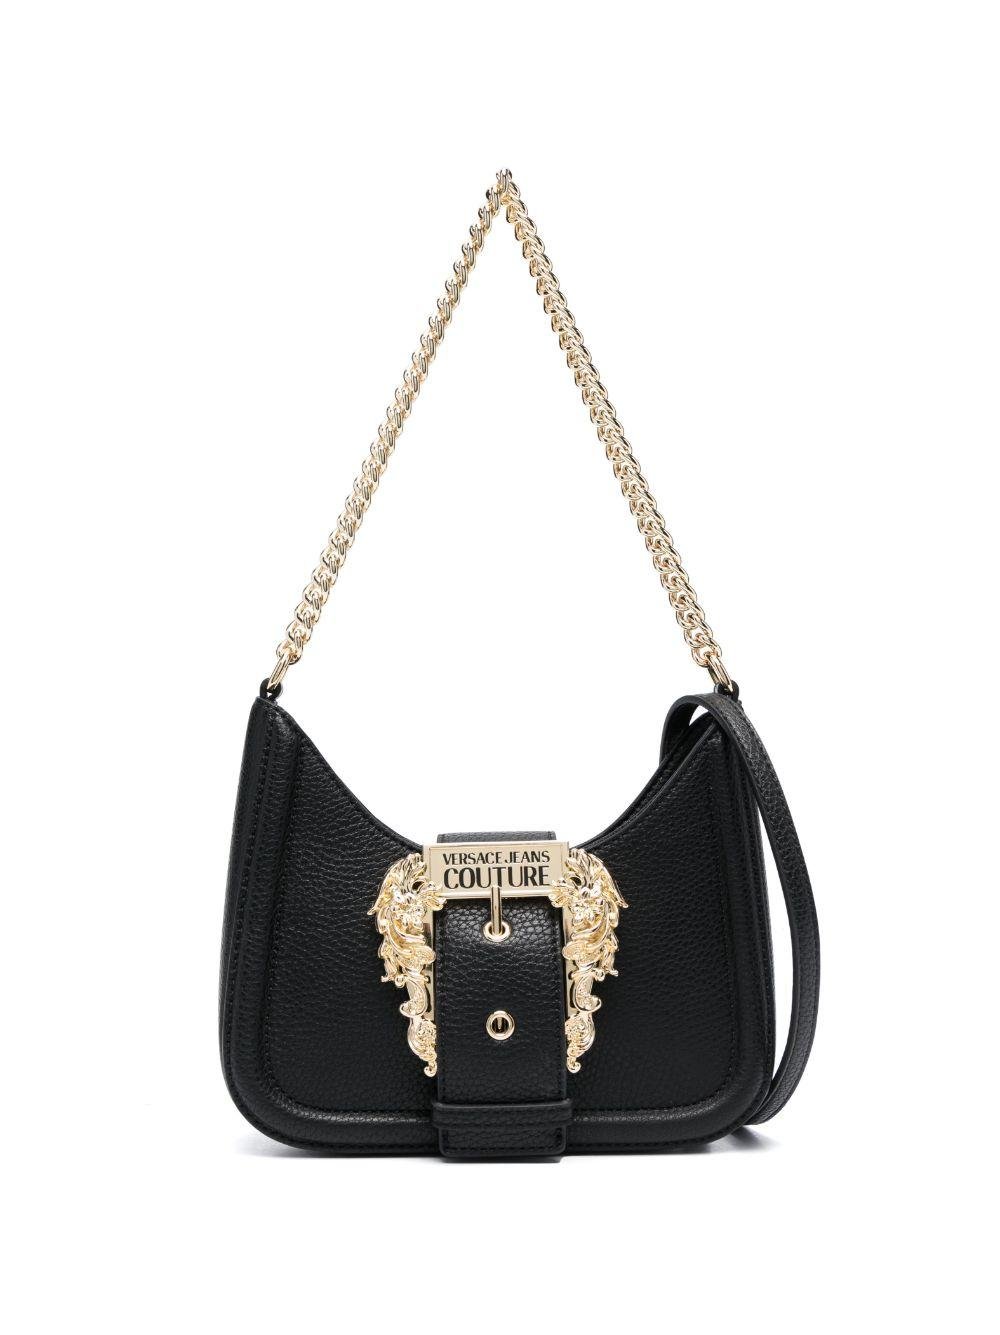 Versace Jeans Couture Chain Couture - Crossbody bag for Woman - Black -  75VA4BF1-ZS807_G89